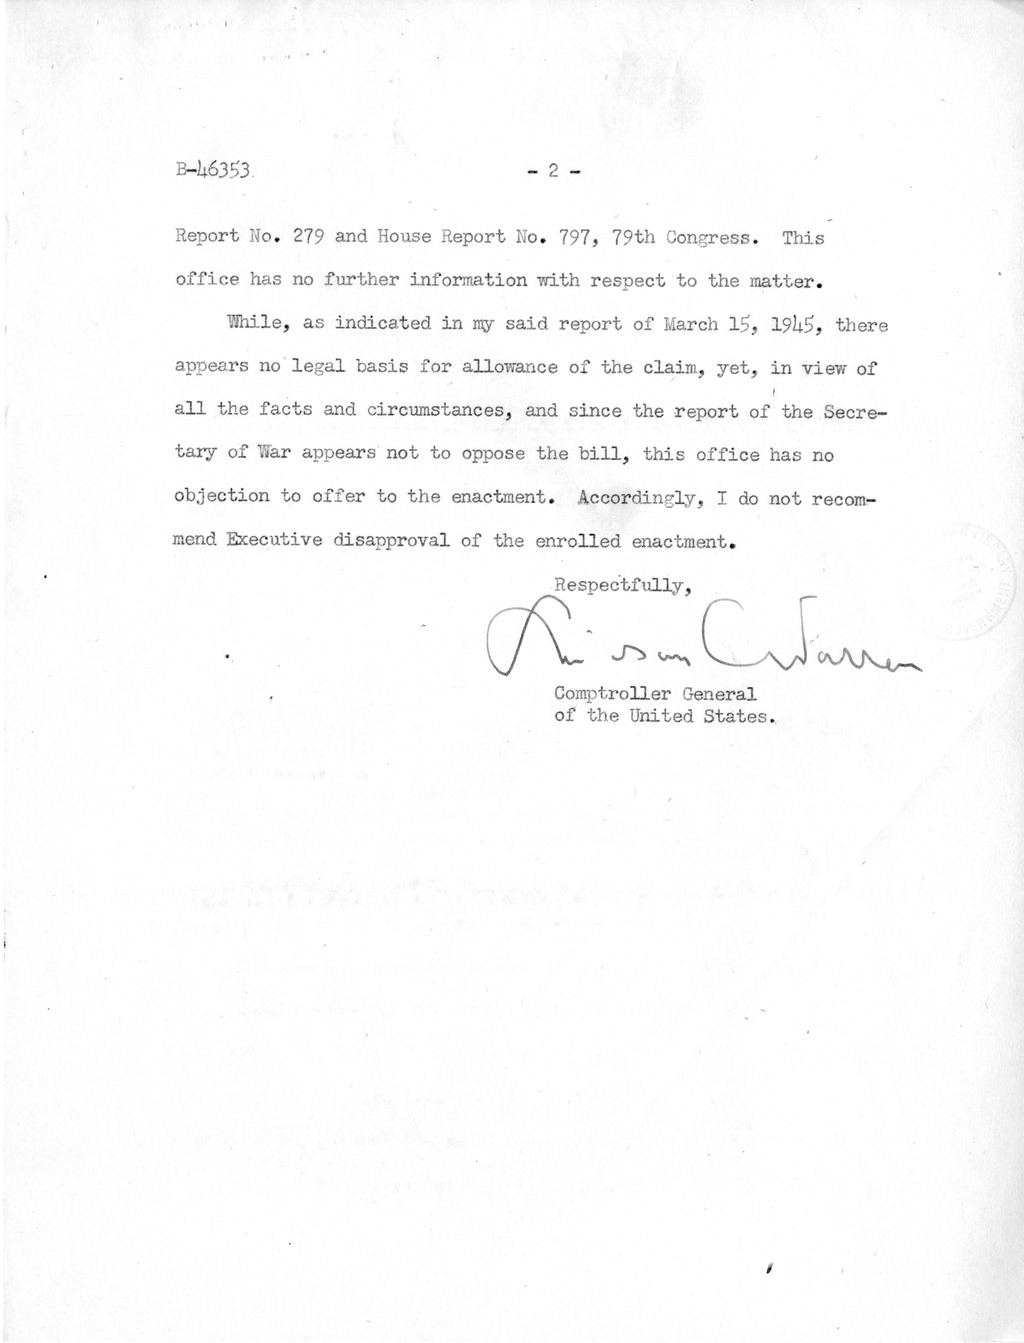 Memorandum from Harold D. Smith to M. C. Latta, S. 501, For the Relief of the Catholic Chancery Office, Incorporated, with Attachments